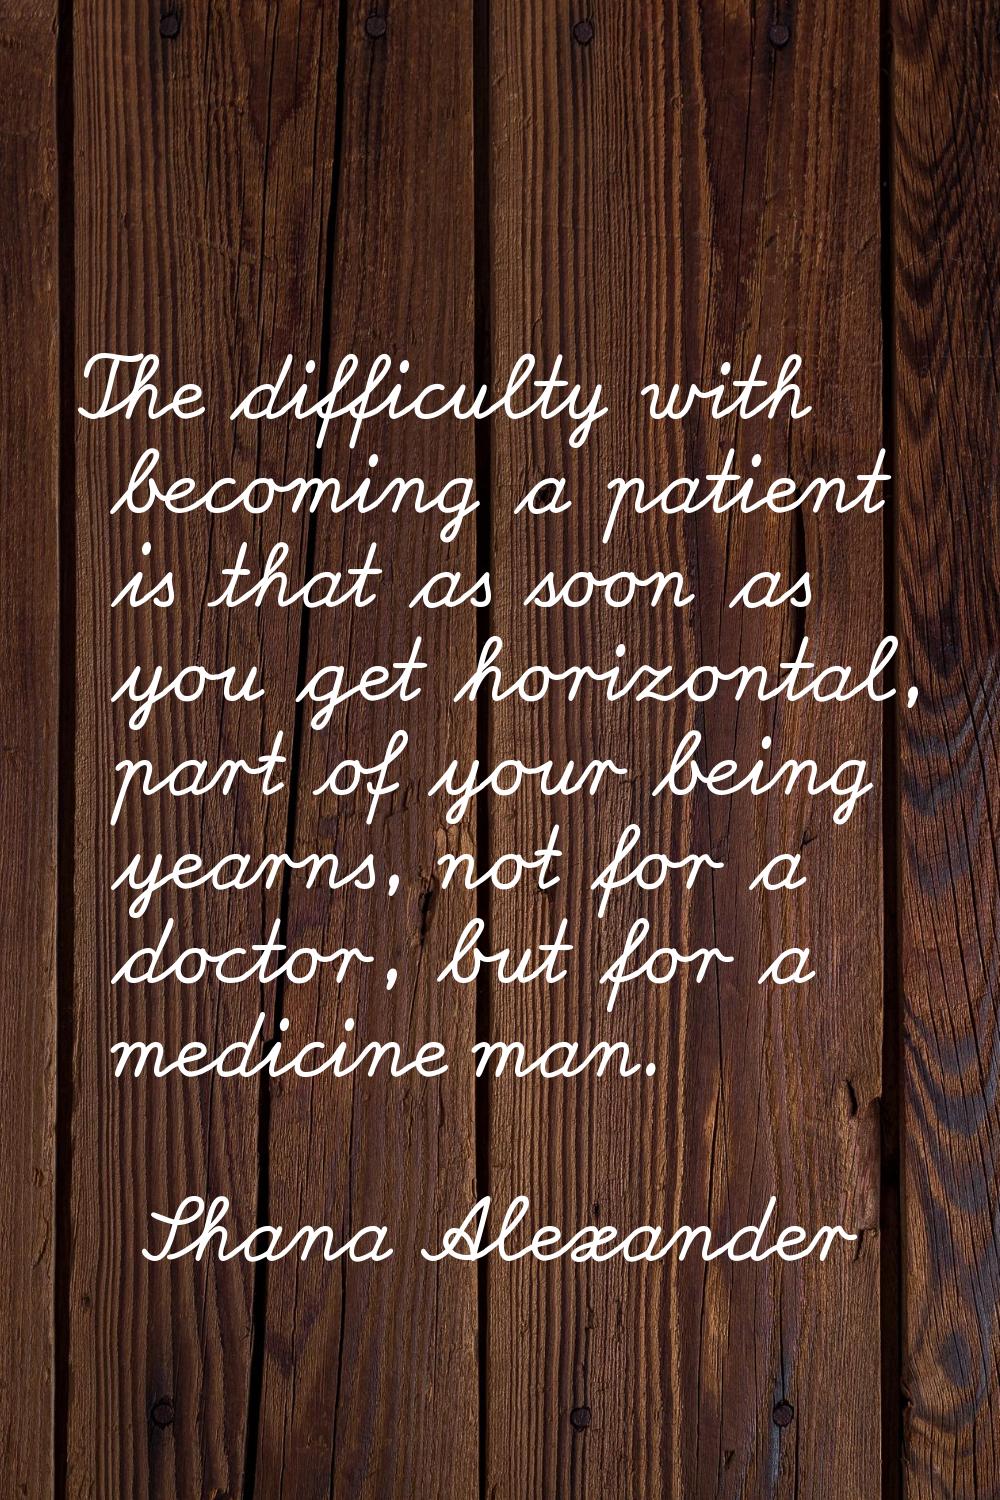 The difficulty with becoming a patient is that as soon as you get horizontal, part of your being ye